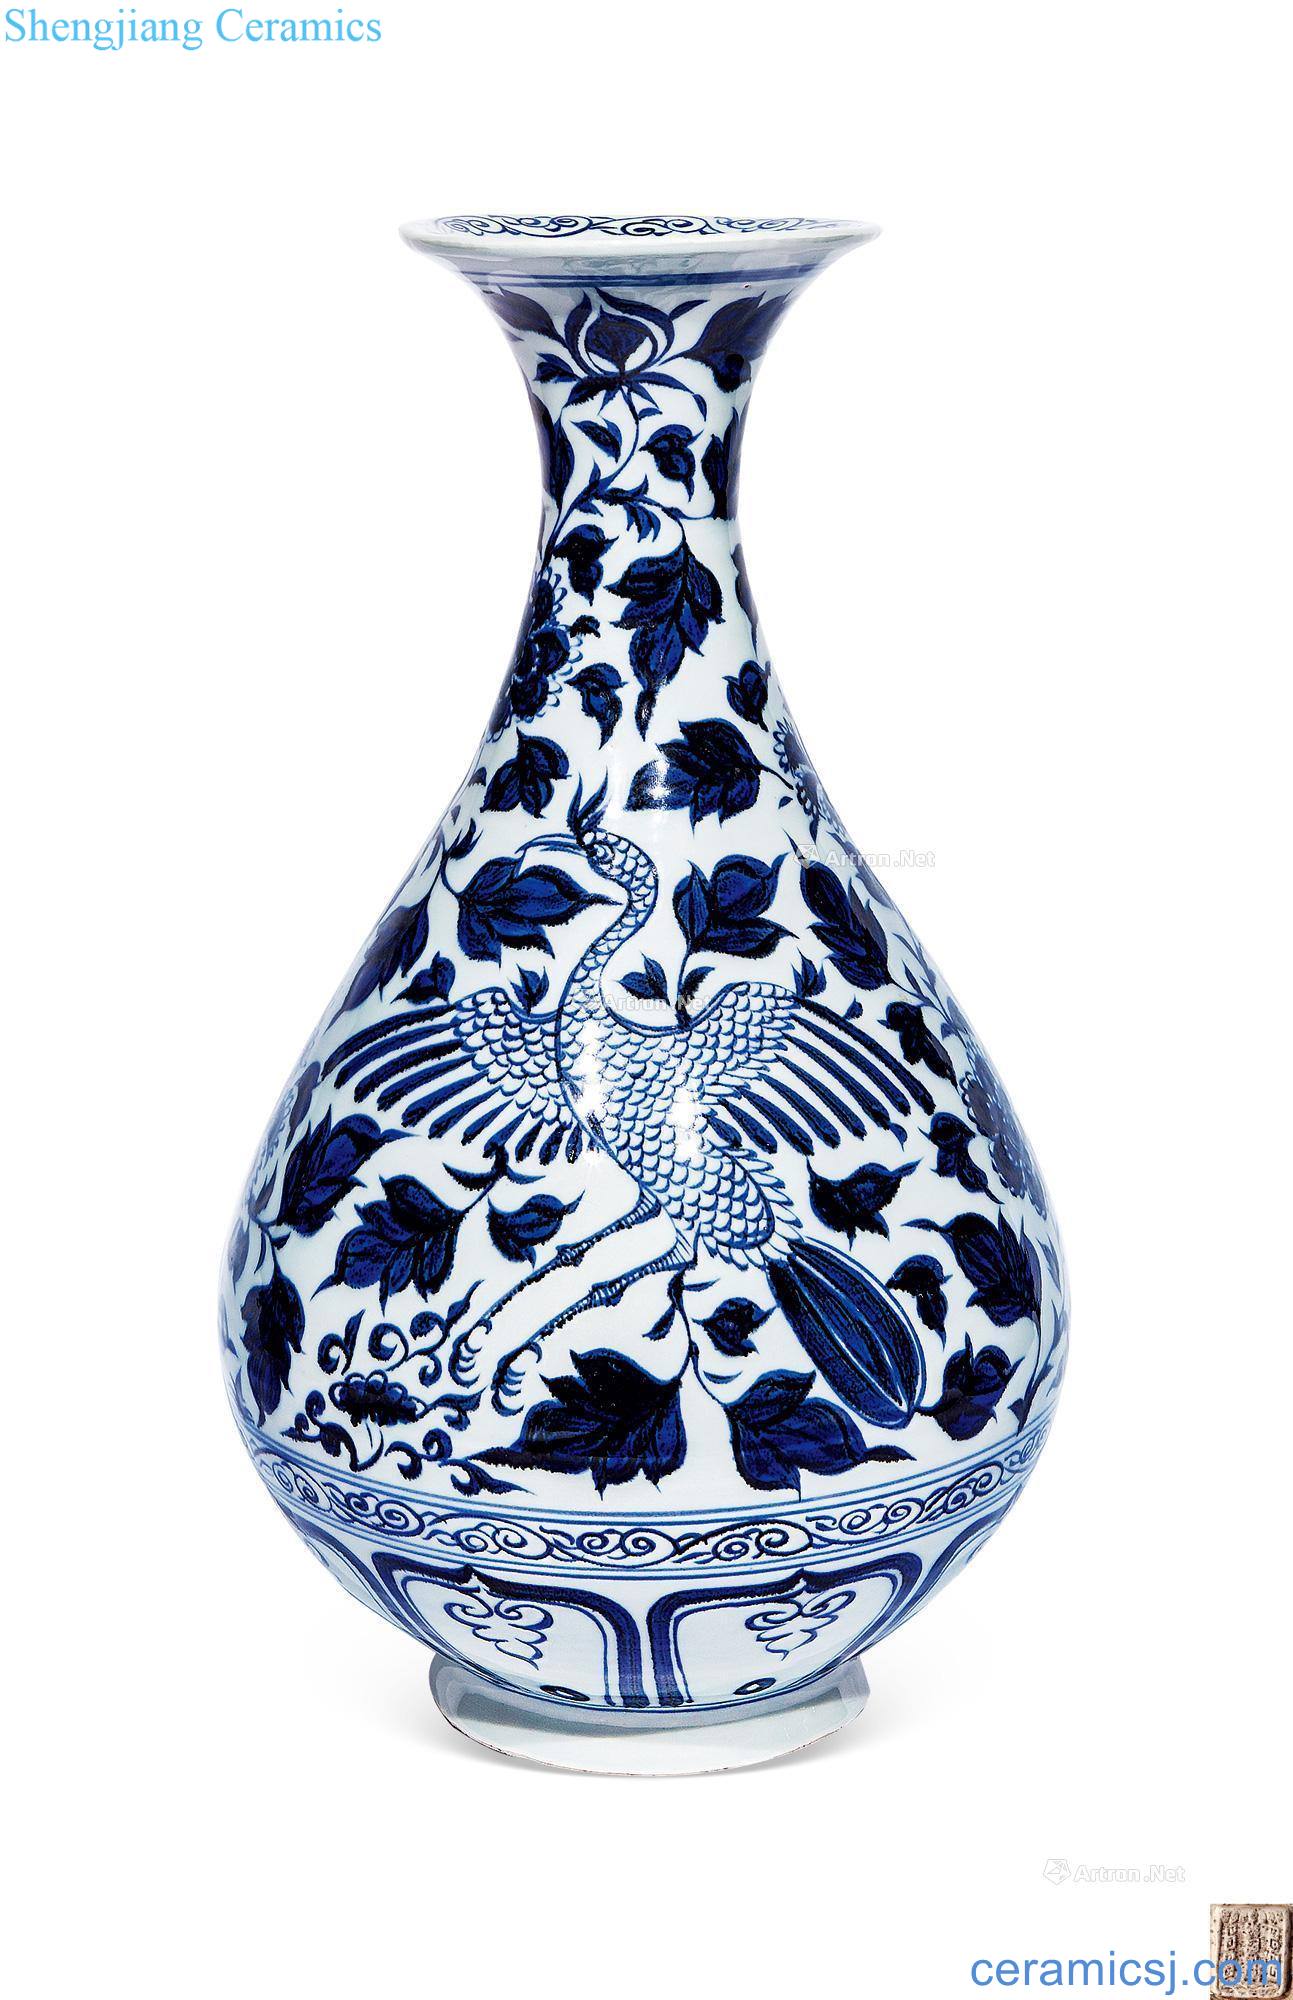 The yuan dynasty Feng wearing blue and white okho spring flower bottle